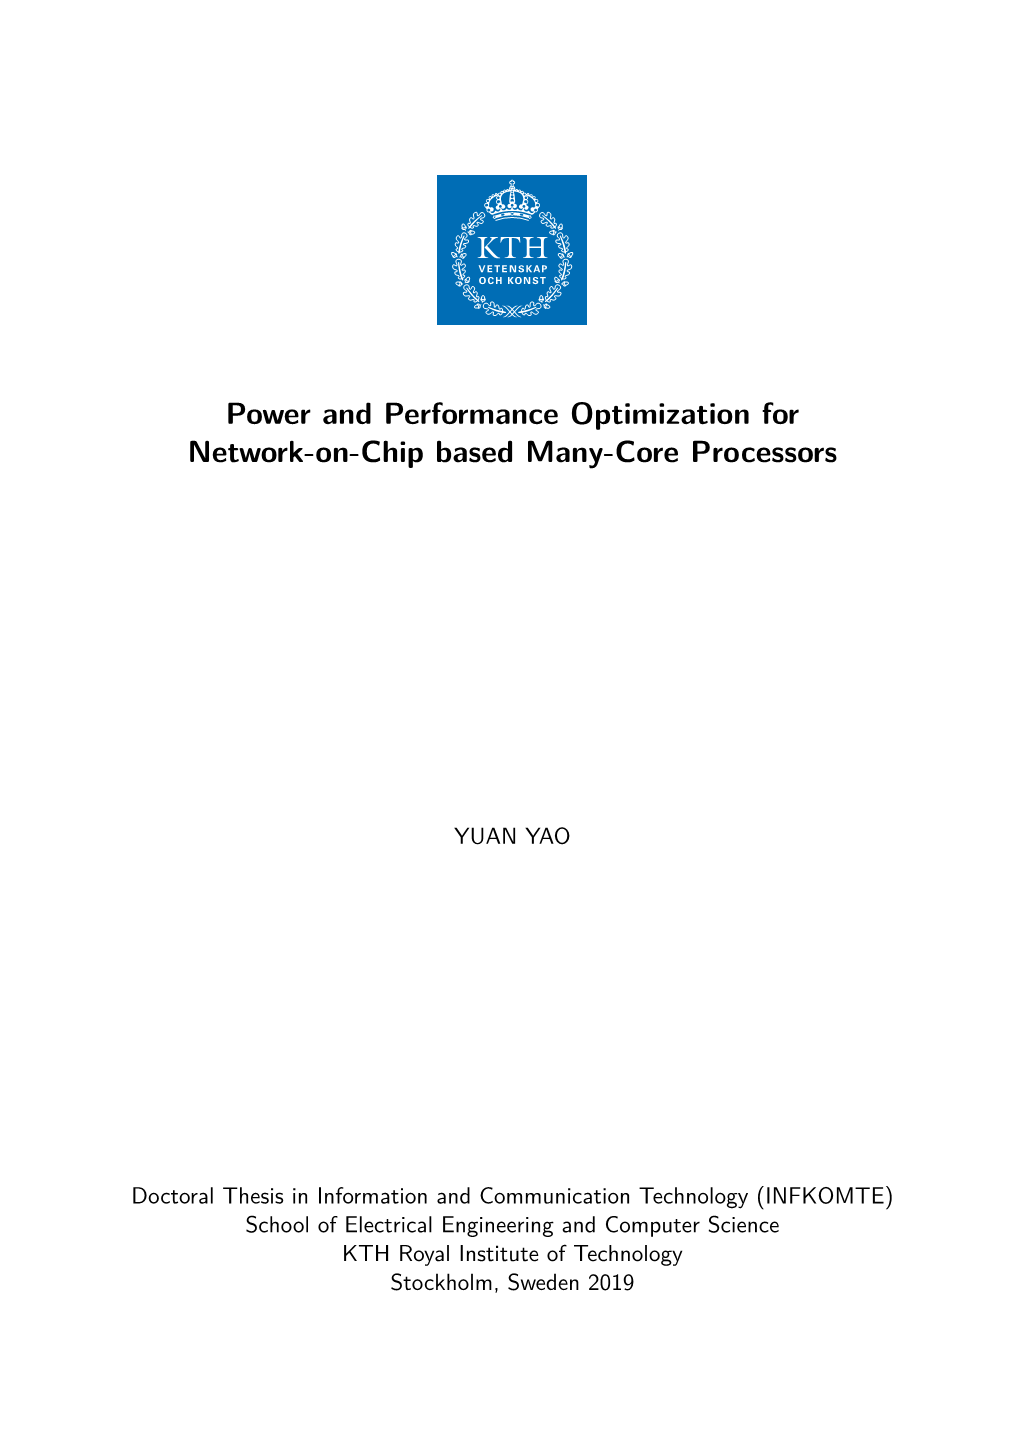 Power and Performance Optimization for Network-On-Chip Based Many-Core Processors